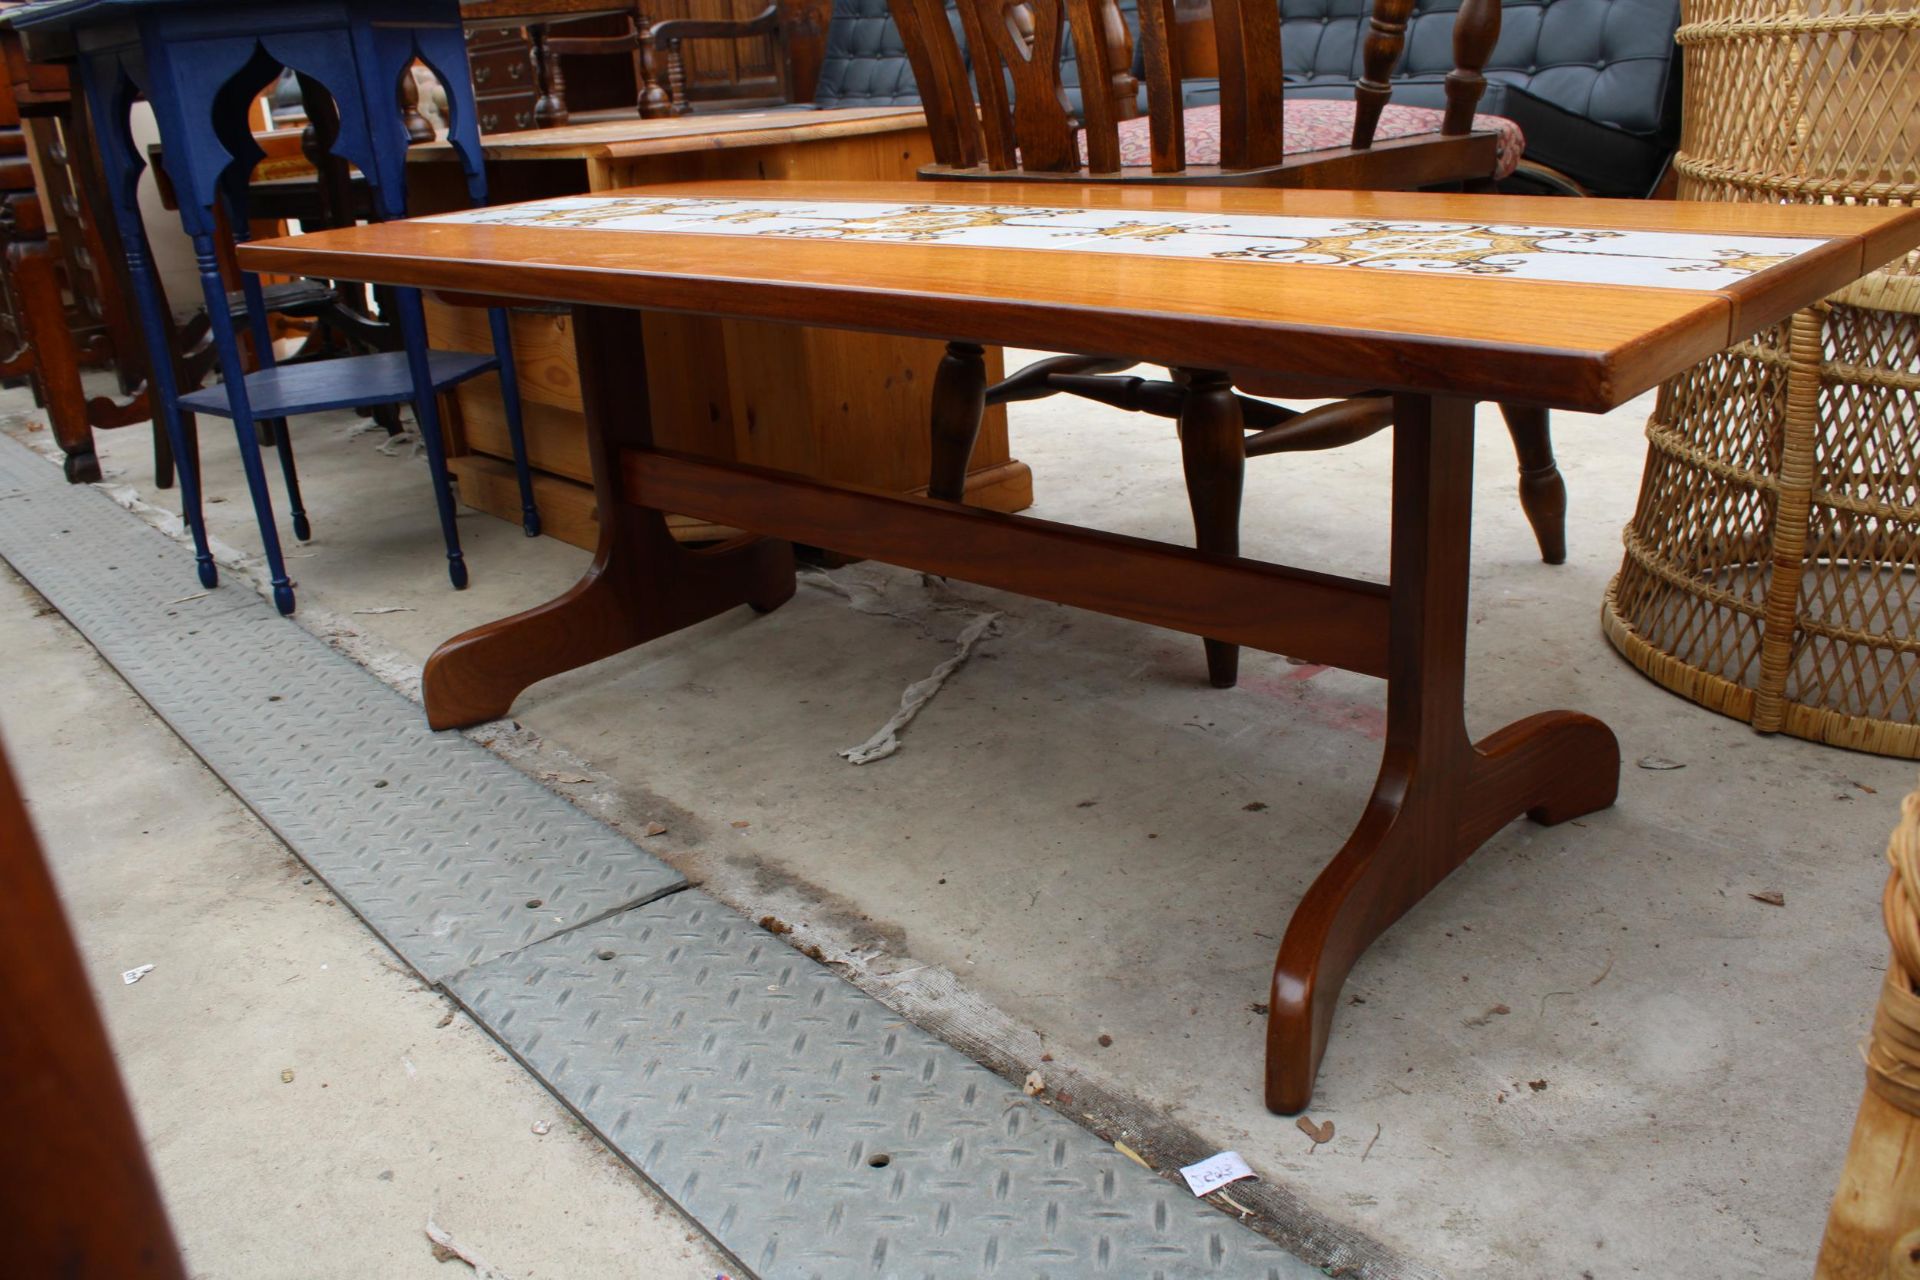 A RETRO TEAK COFFEE TABLE WITH INSET TILE TOP ON WHALE FIN LEGS, 48.5" X 20.5" - Image 2 of 2